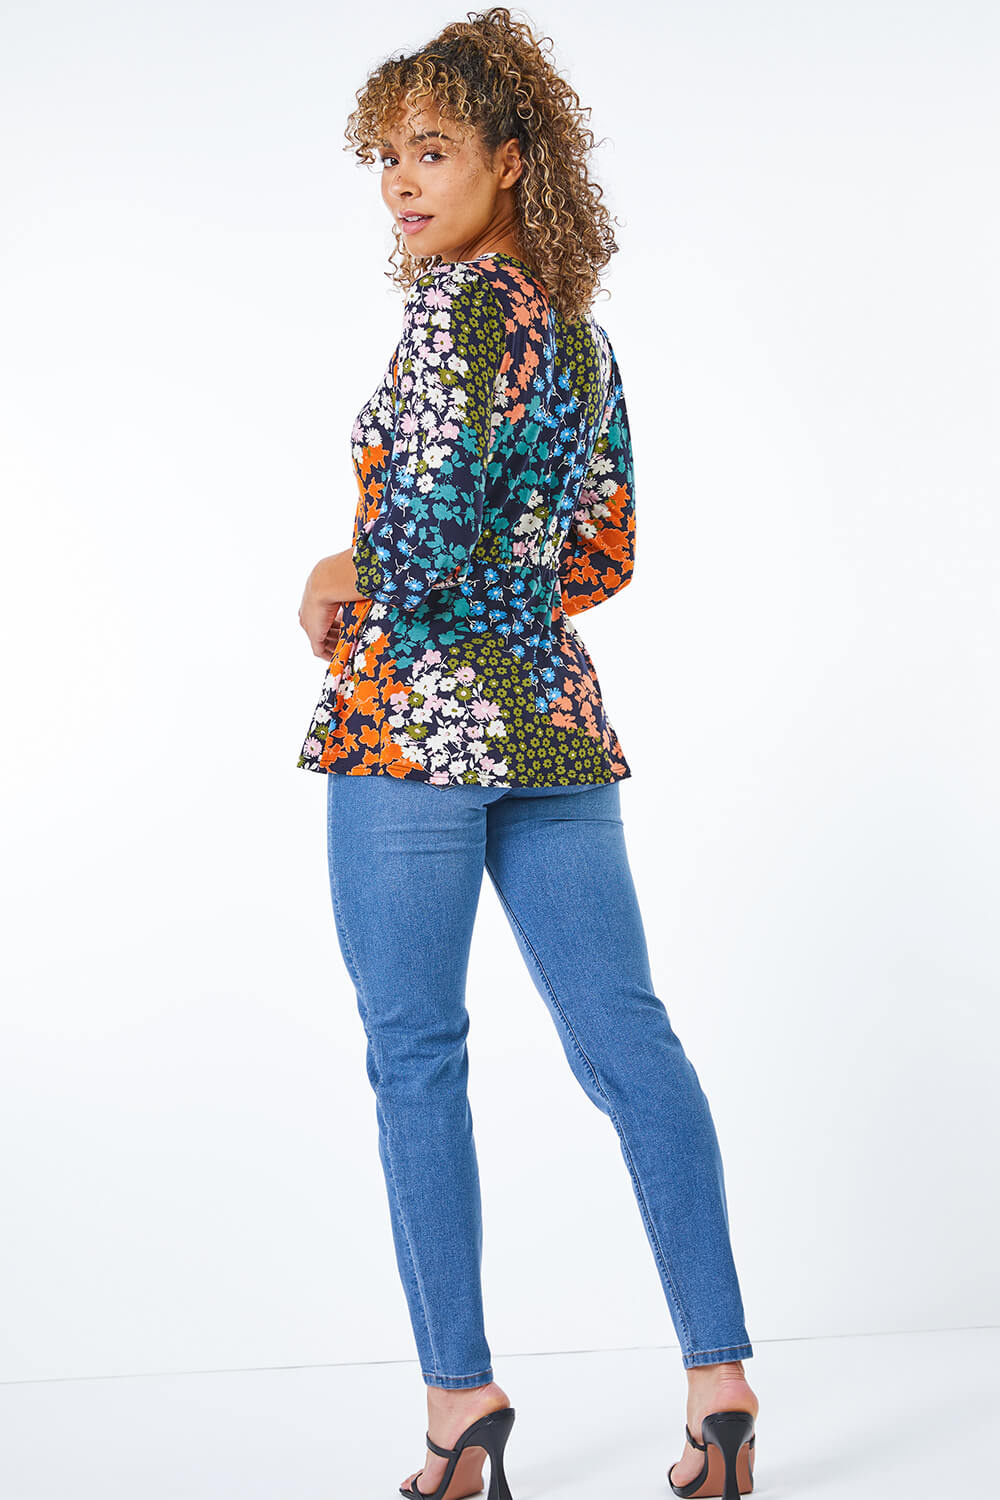 KHAKI Petite Floral Puff Sleeve Top, Image 3 of 5